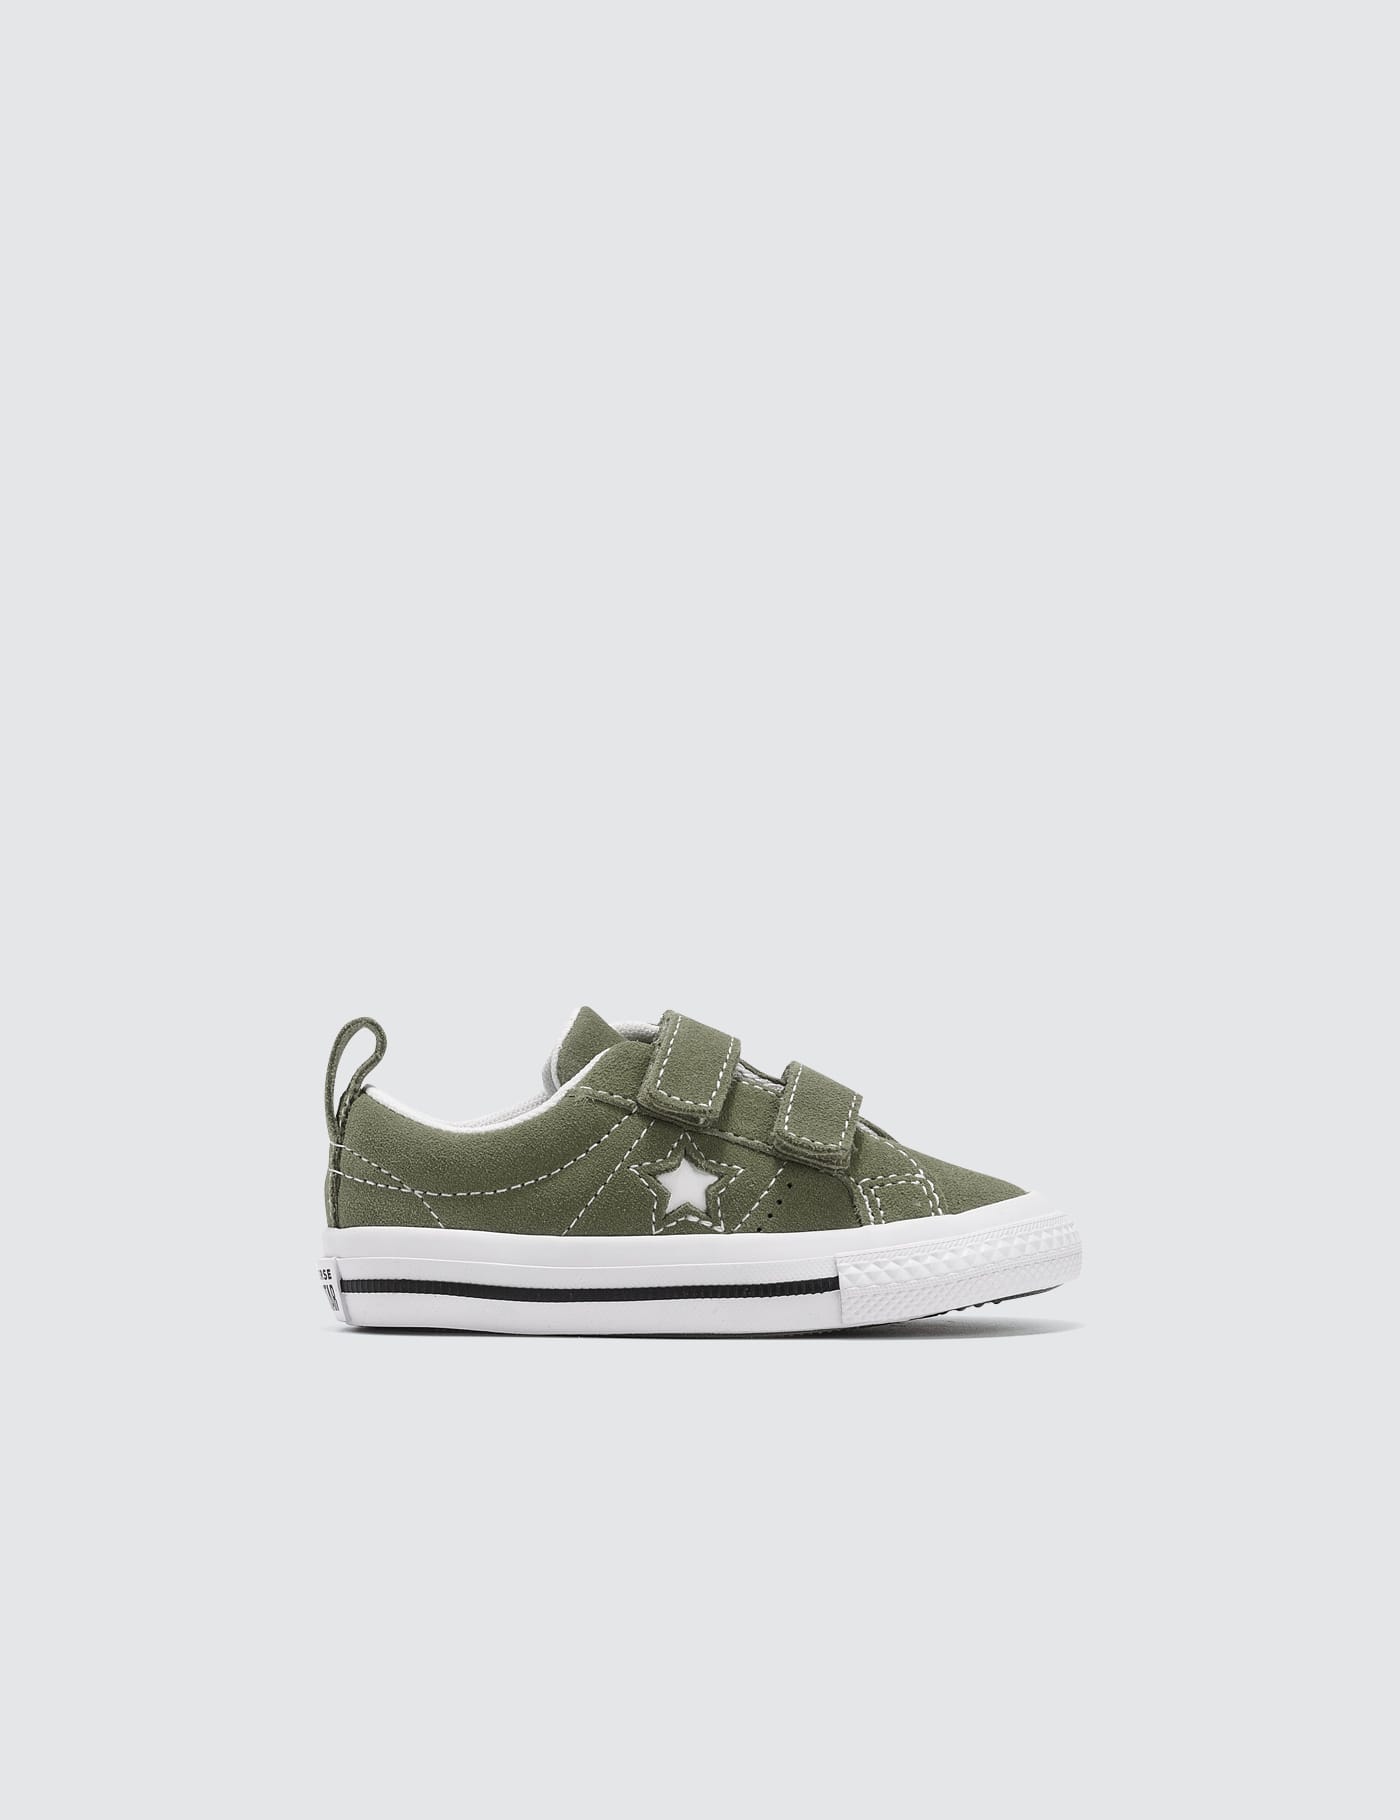 converse one star 2v infant